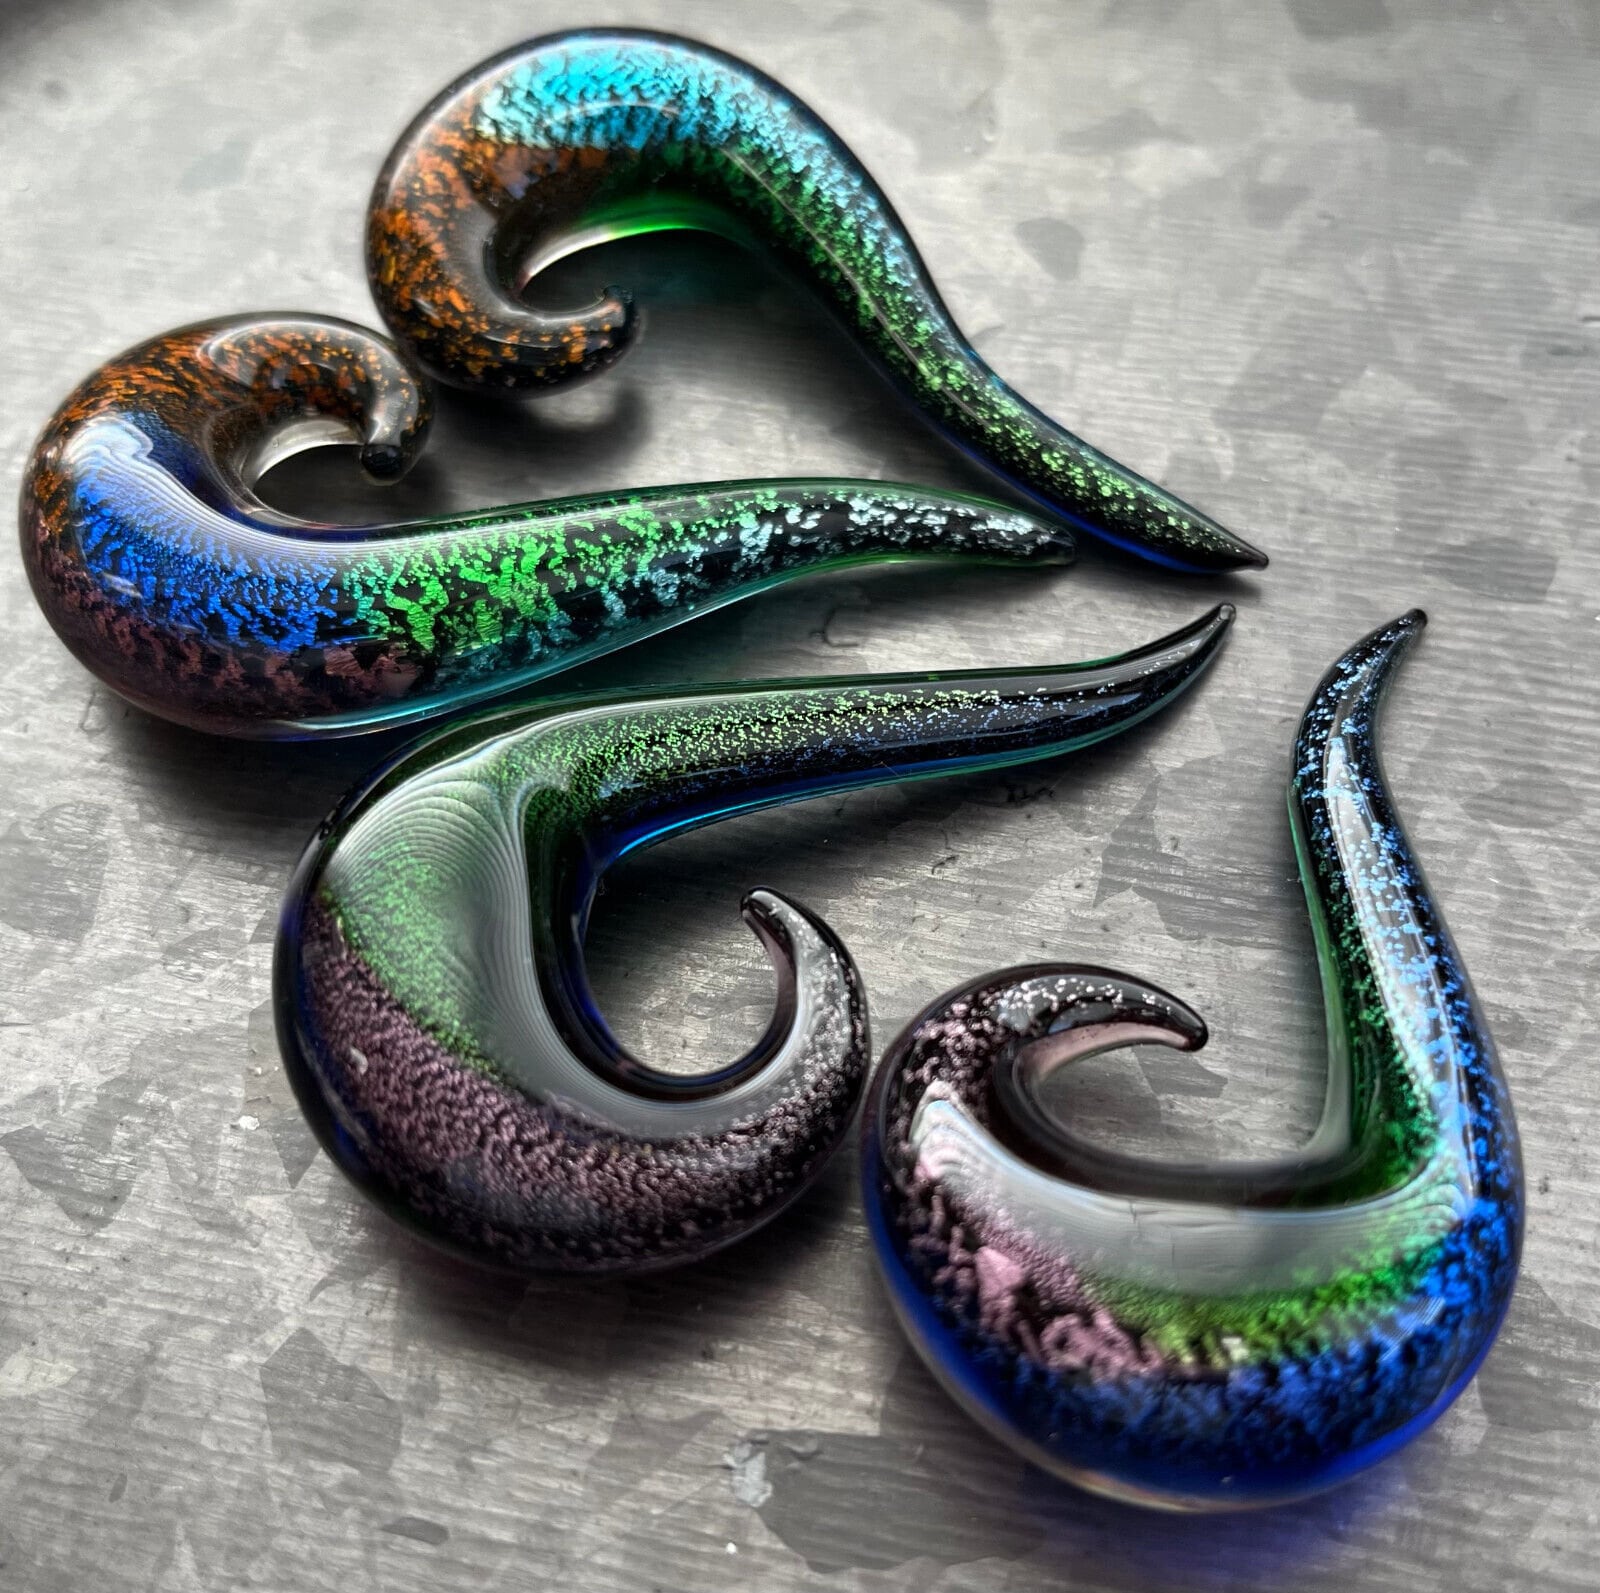 PAIR of Stunning Rainbow Dichroic Glass Spiral Hanging Tapers/Plugs - Expanders - Gauges 4g (5mm) thru 5/8" (16mm) Available!